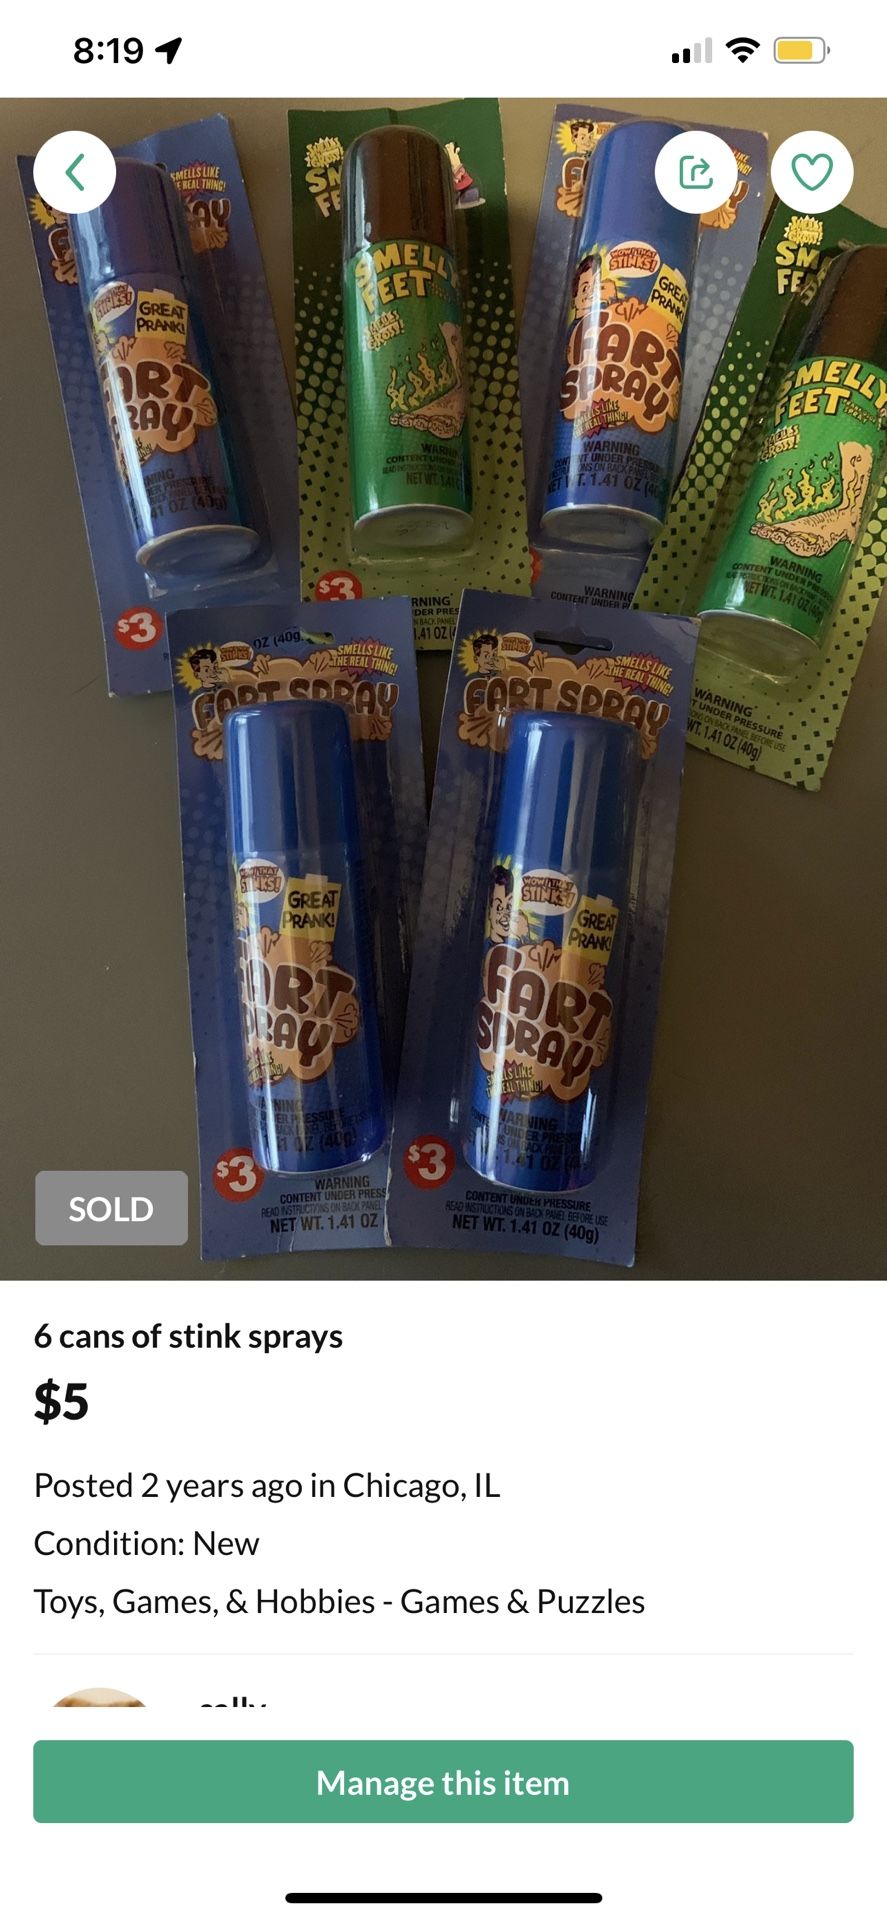 6 cans of stink sprays